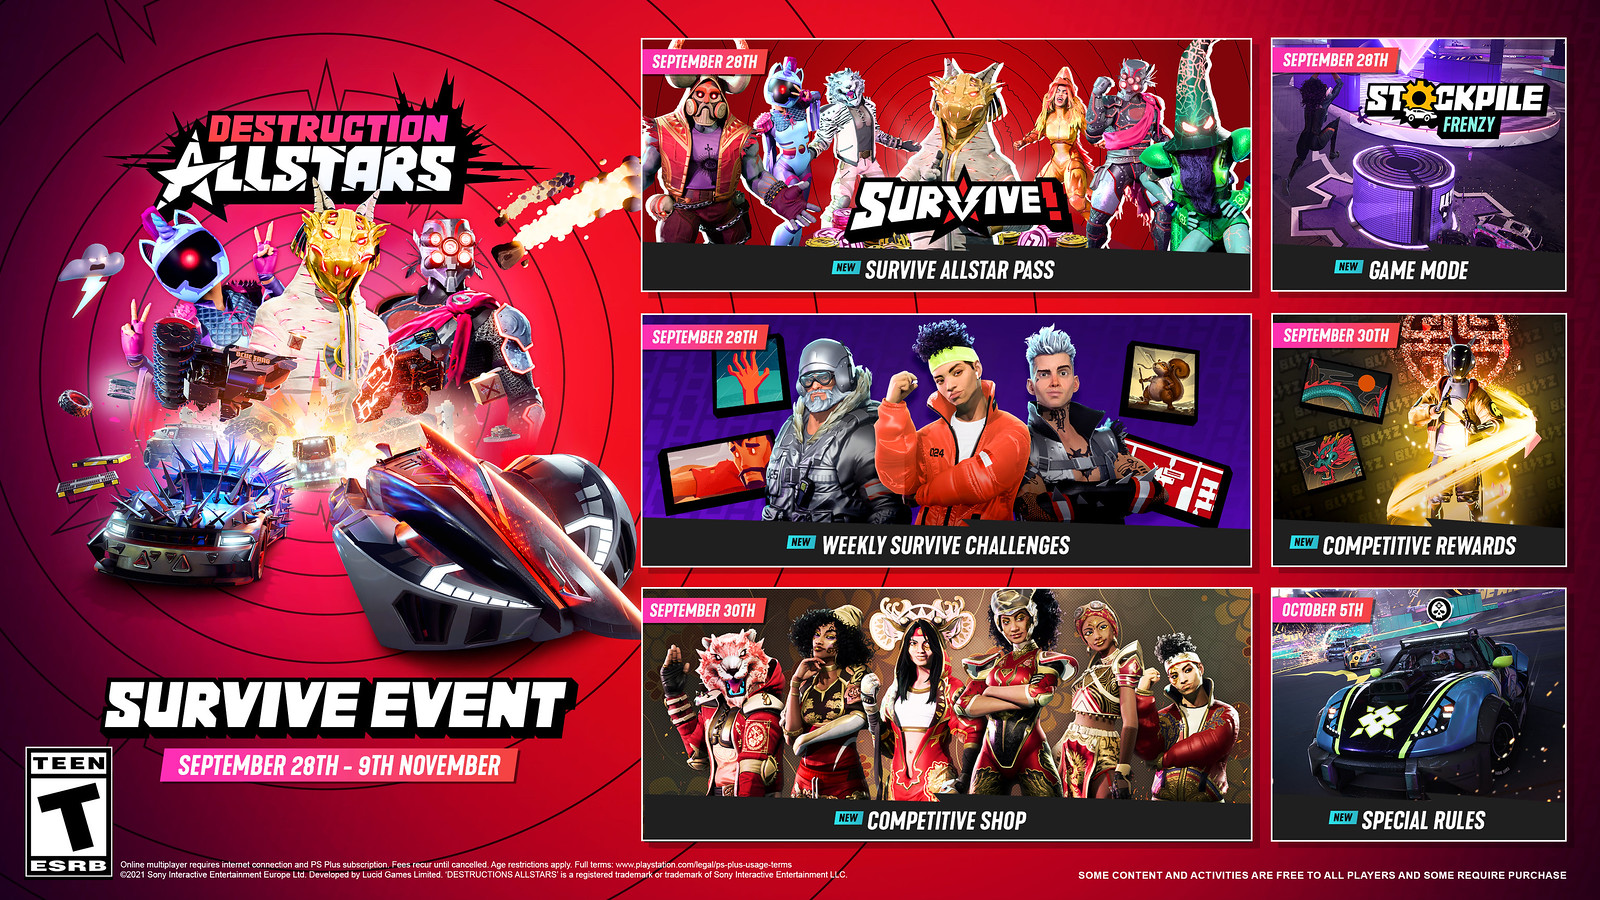 Survive Event runs from September 20 to November 9. Survive AllStar Pass, Stockpile Frenzy game mode and Weekly Survive Challenges will be available September 28. Competitive Rewards will roll out September 30, as to will the Competitive Shop. Special Rules will launch October 5. Some content and activities are free to all players, while others require purchase.